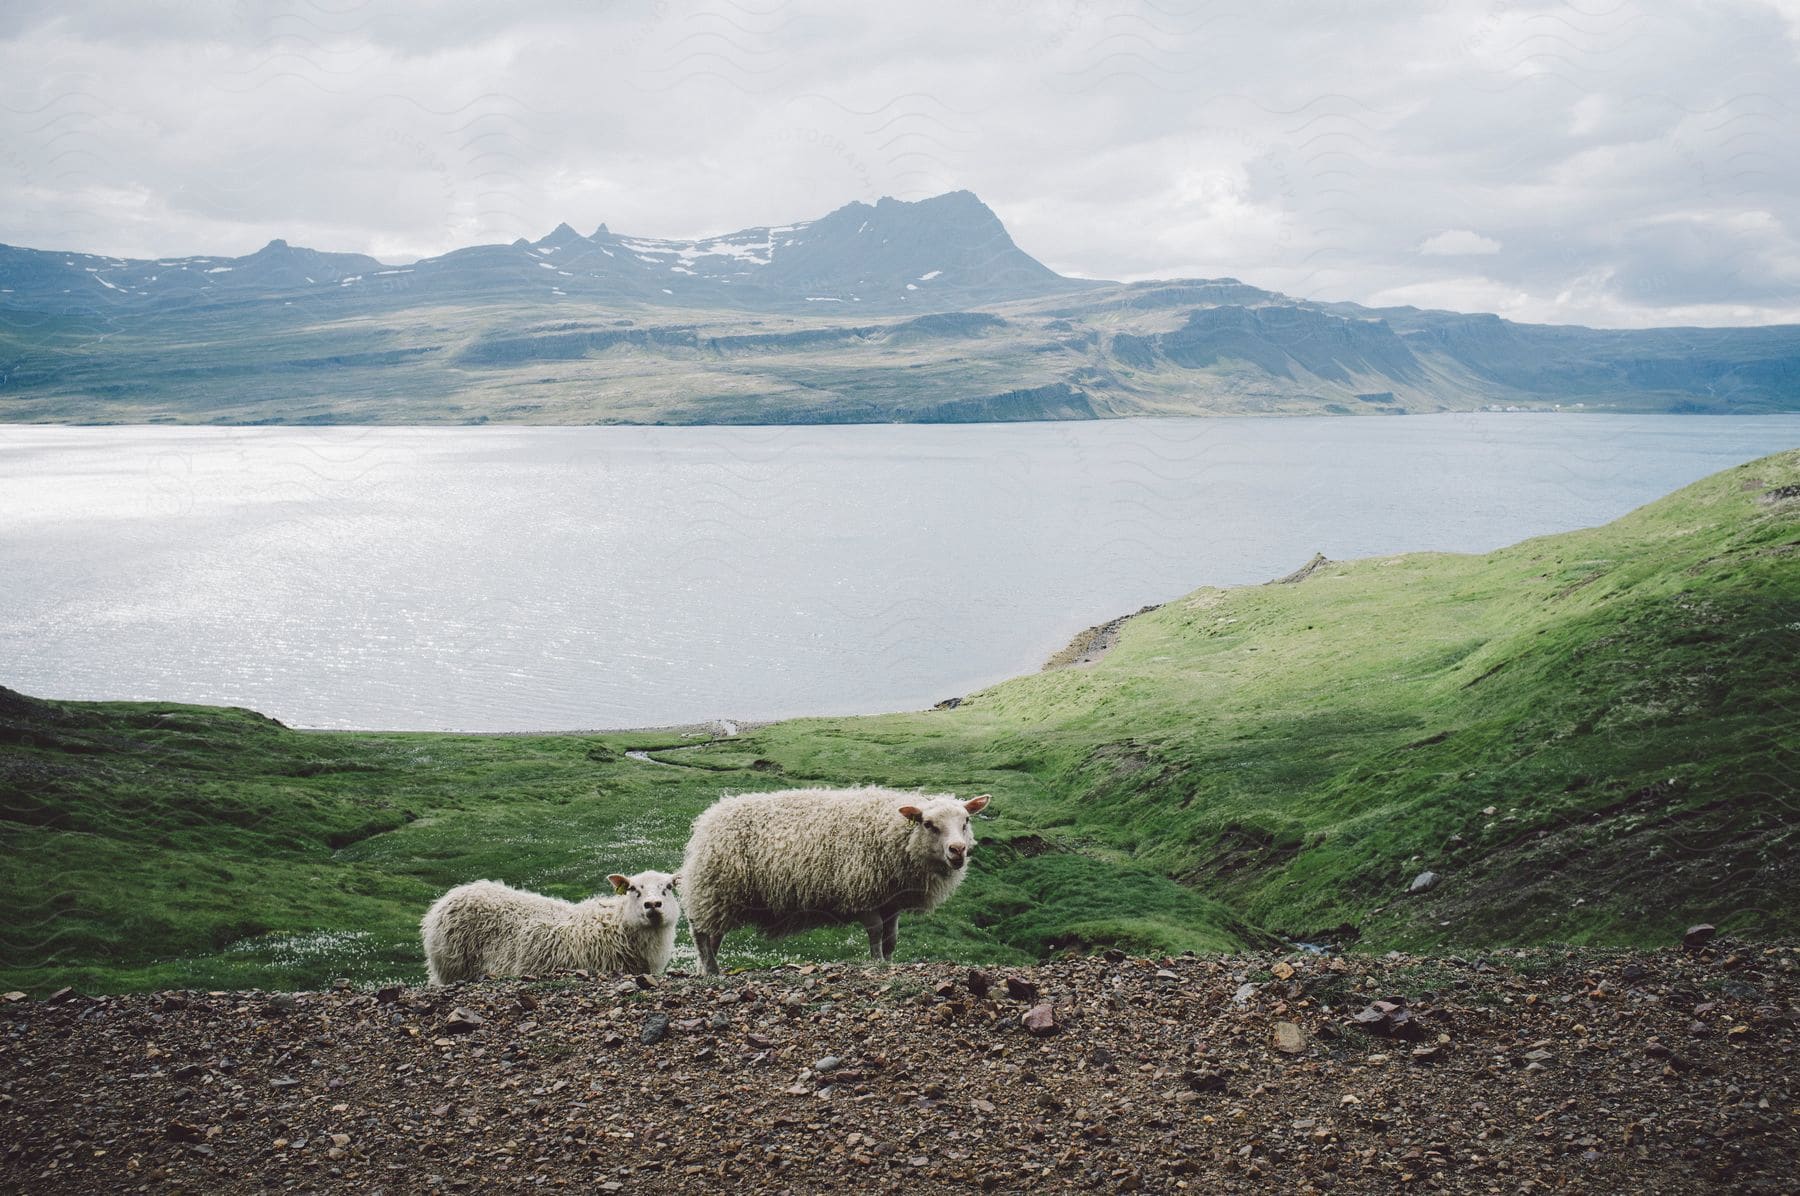 Sheep in rock bed near grassy hills by lake with mountains